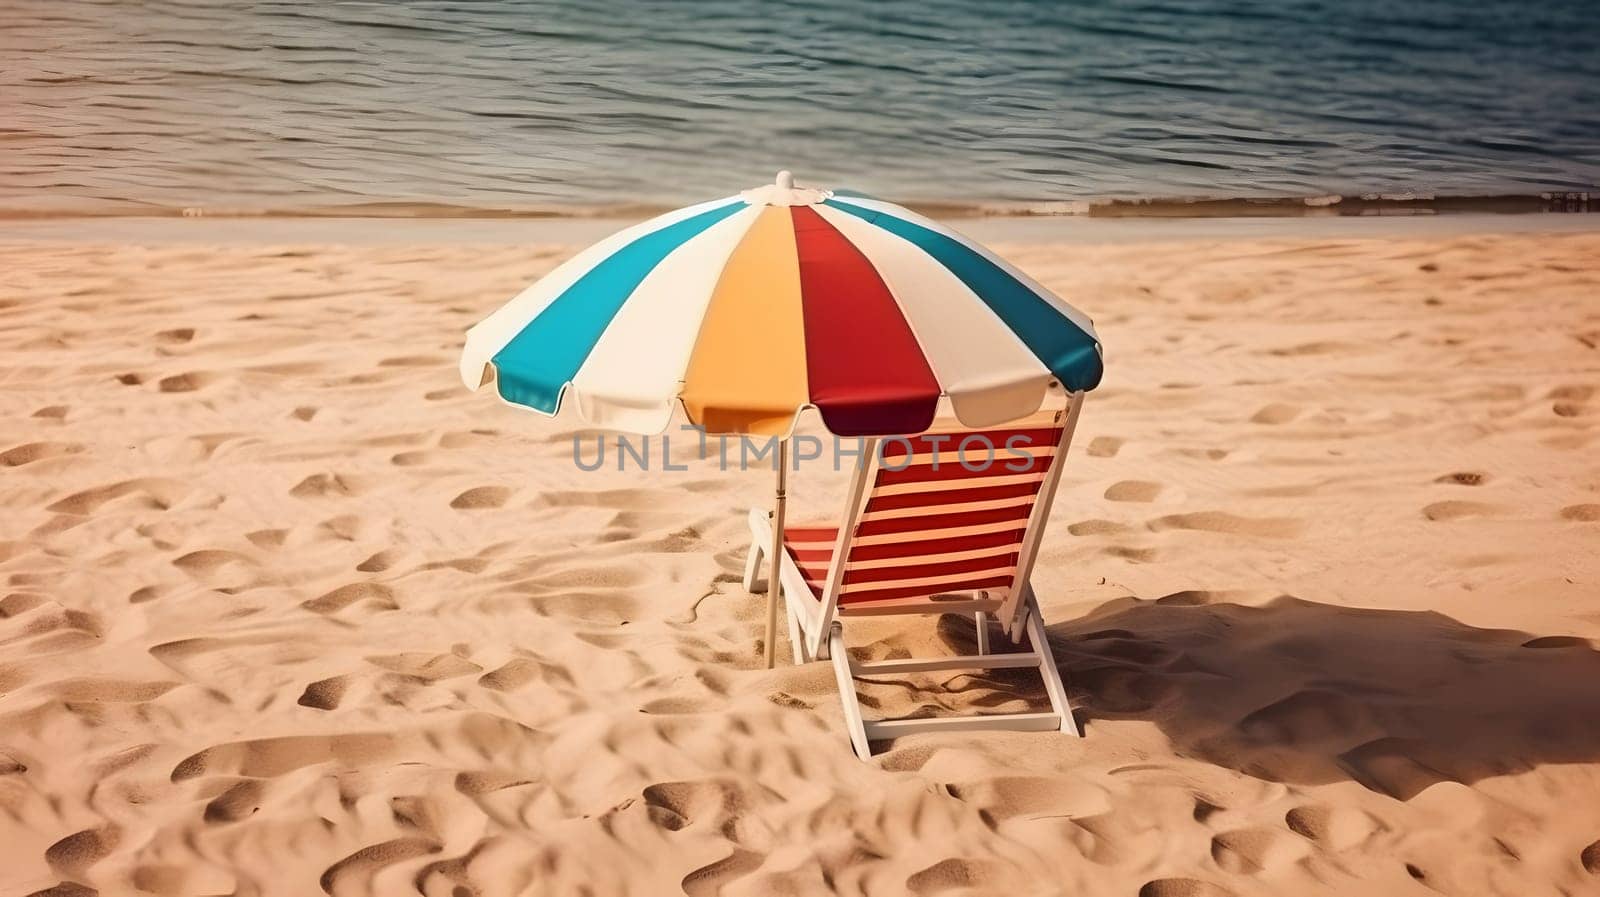 Beach umbrella with chair on the sand beach - summer vacation theme header, neural network generated art by z1b